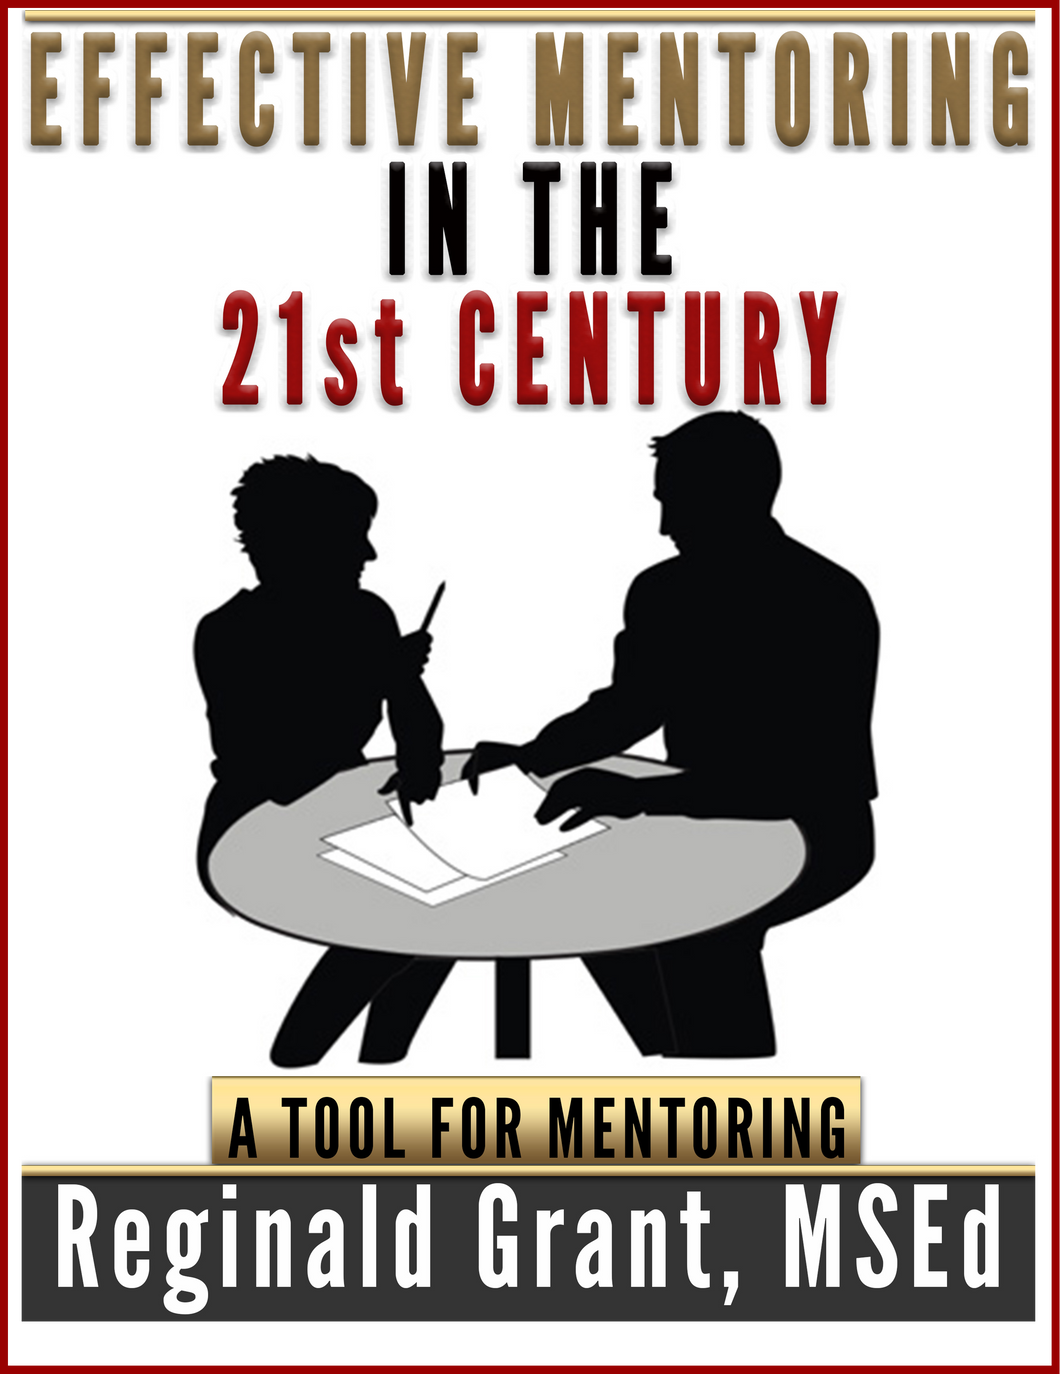 Effective Mentoring in the 21st Century: A Tool for Mentoring